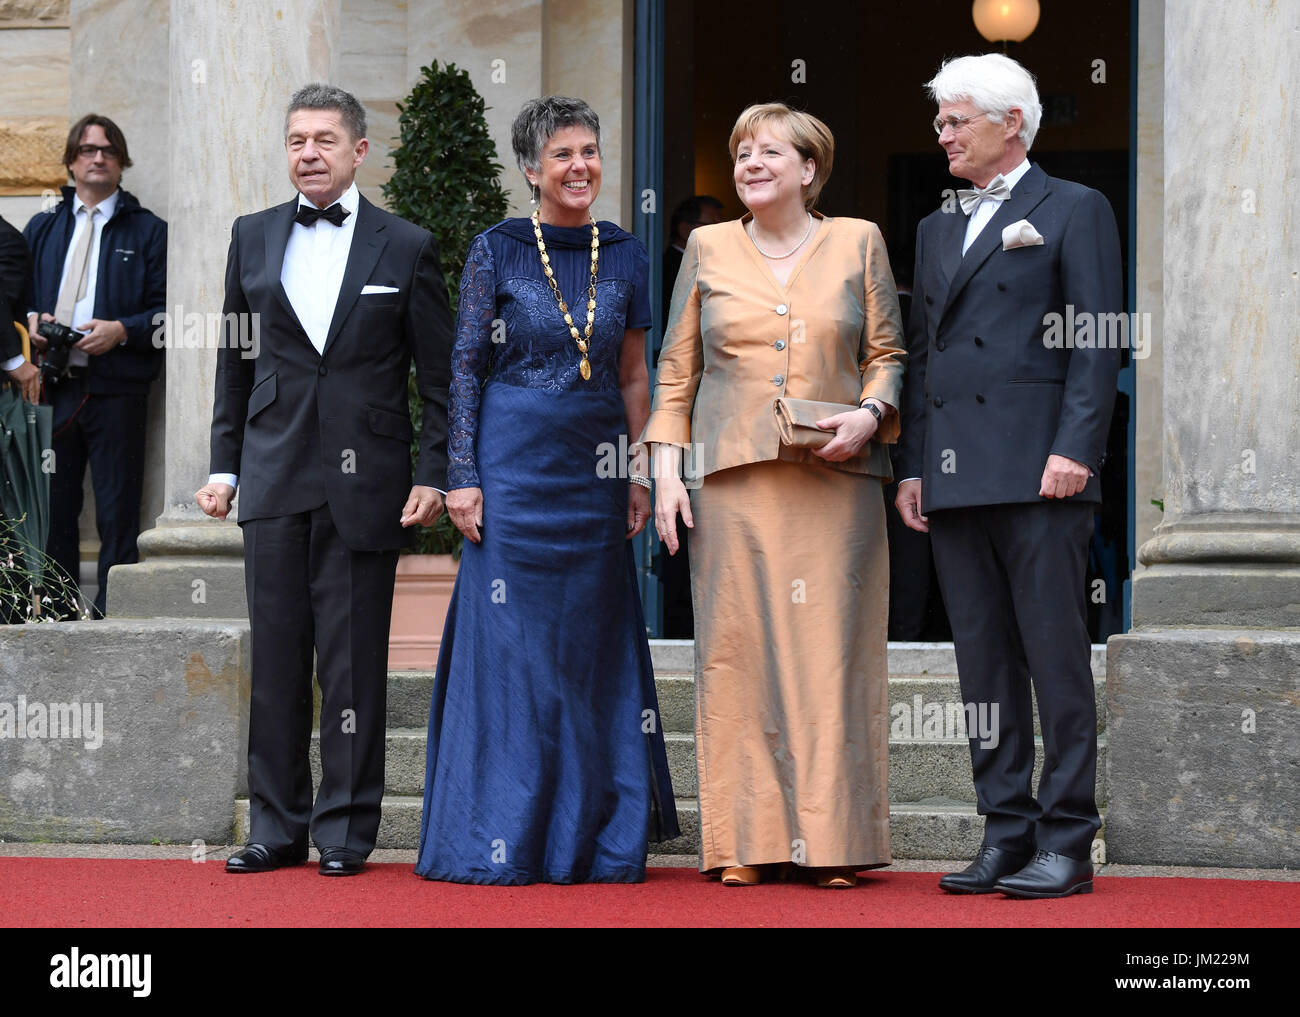 Bayreuth, Germany. 25th July, 2017. German Chancellor Angela Merkel (CDU, 2.f.R), her husband Joachim Sauer (L), mayoress of Bayreuth Brigitte Merk-Erbe (2.f.L), and her husband Thomas (r) arrive at the opening of the Bayreuth Festival 2017 in Bayreuth, Germany, 25 July 2017. The festival opens with the opera 'Die Meistersinger von Nuernberg' (The Master-Singers of Nuremberg). Photo: Tobias Hase/dpa/Alamy Live News Stock Photo